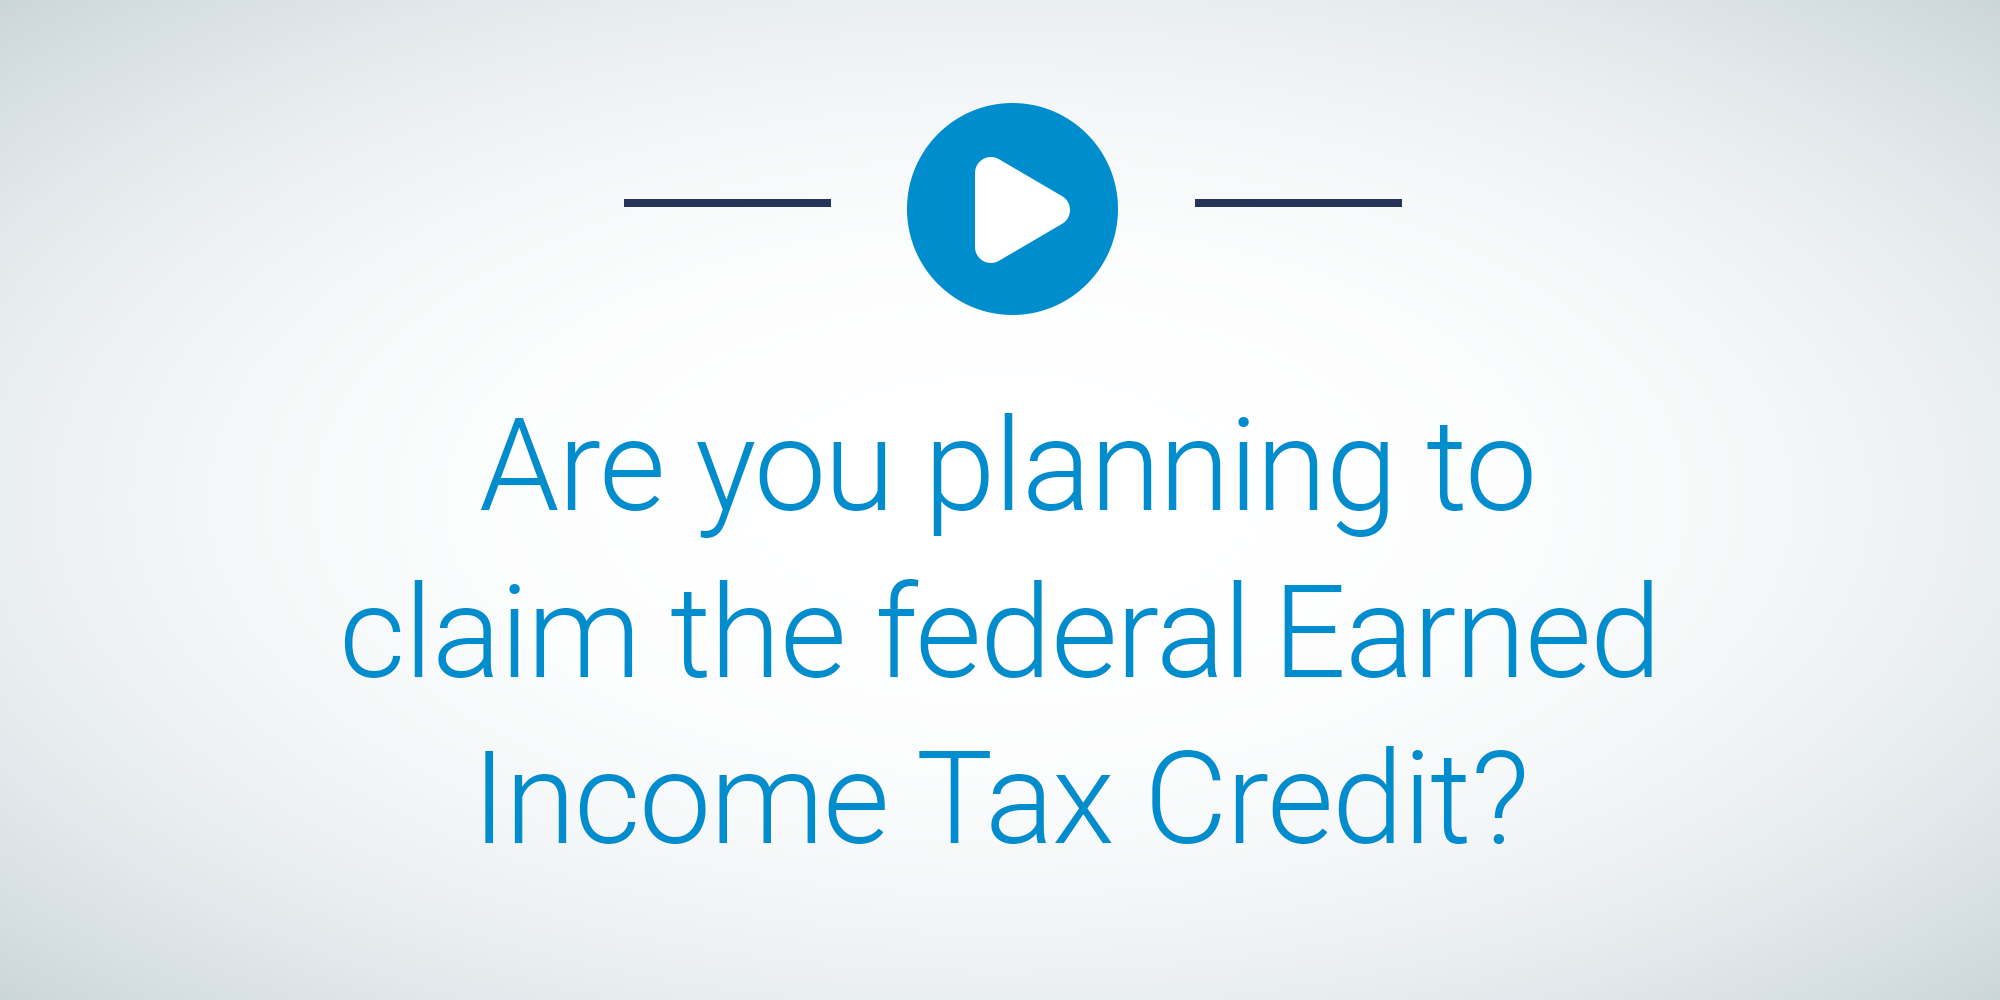 Are you planning to claim the federal Earned Income Tax Credit